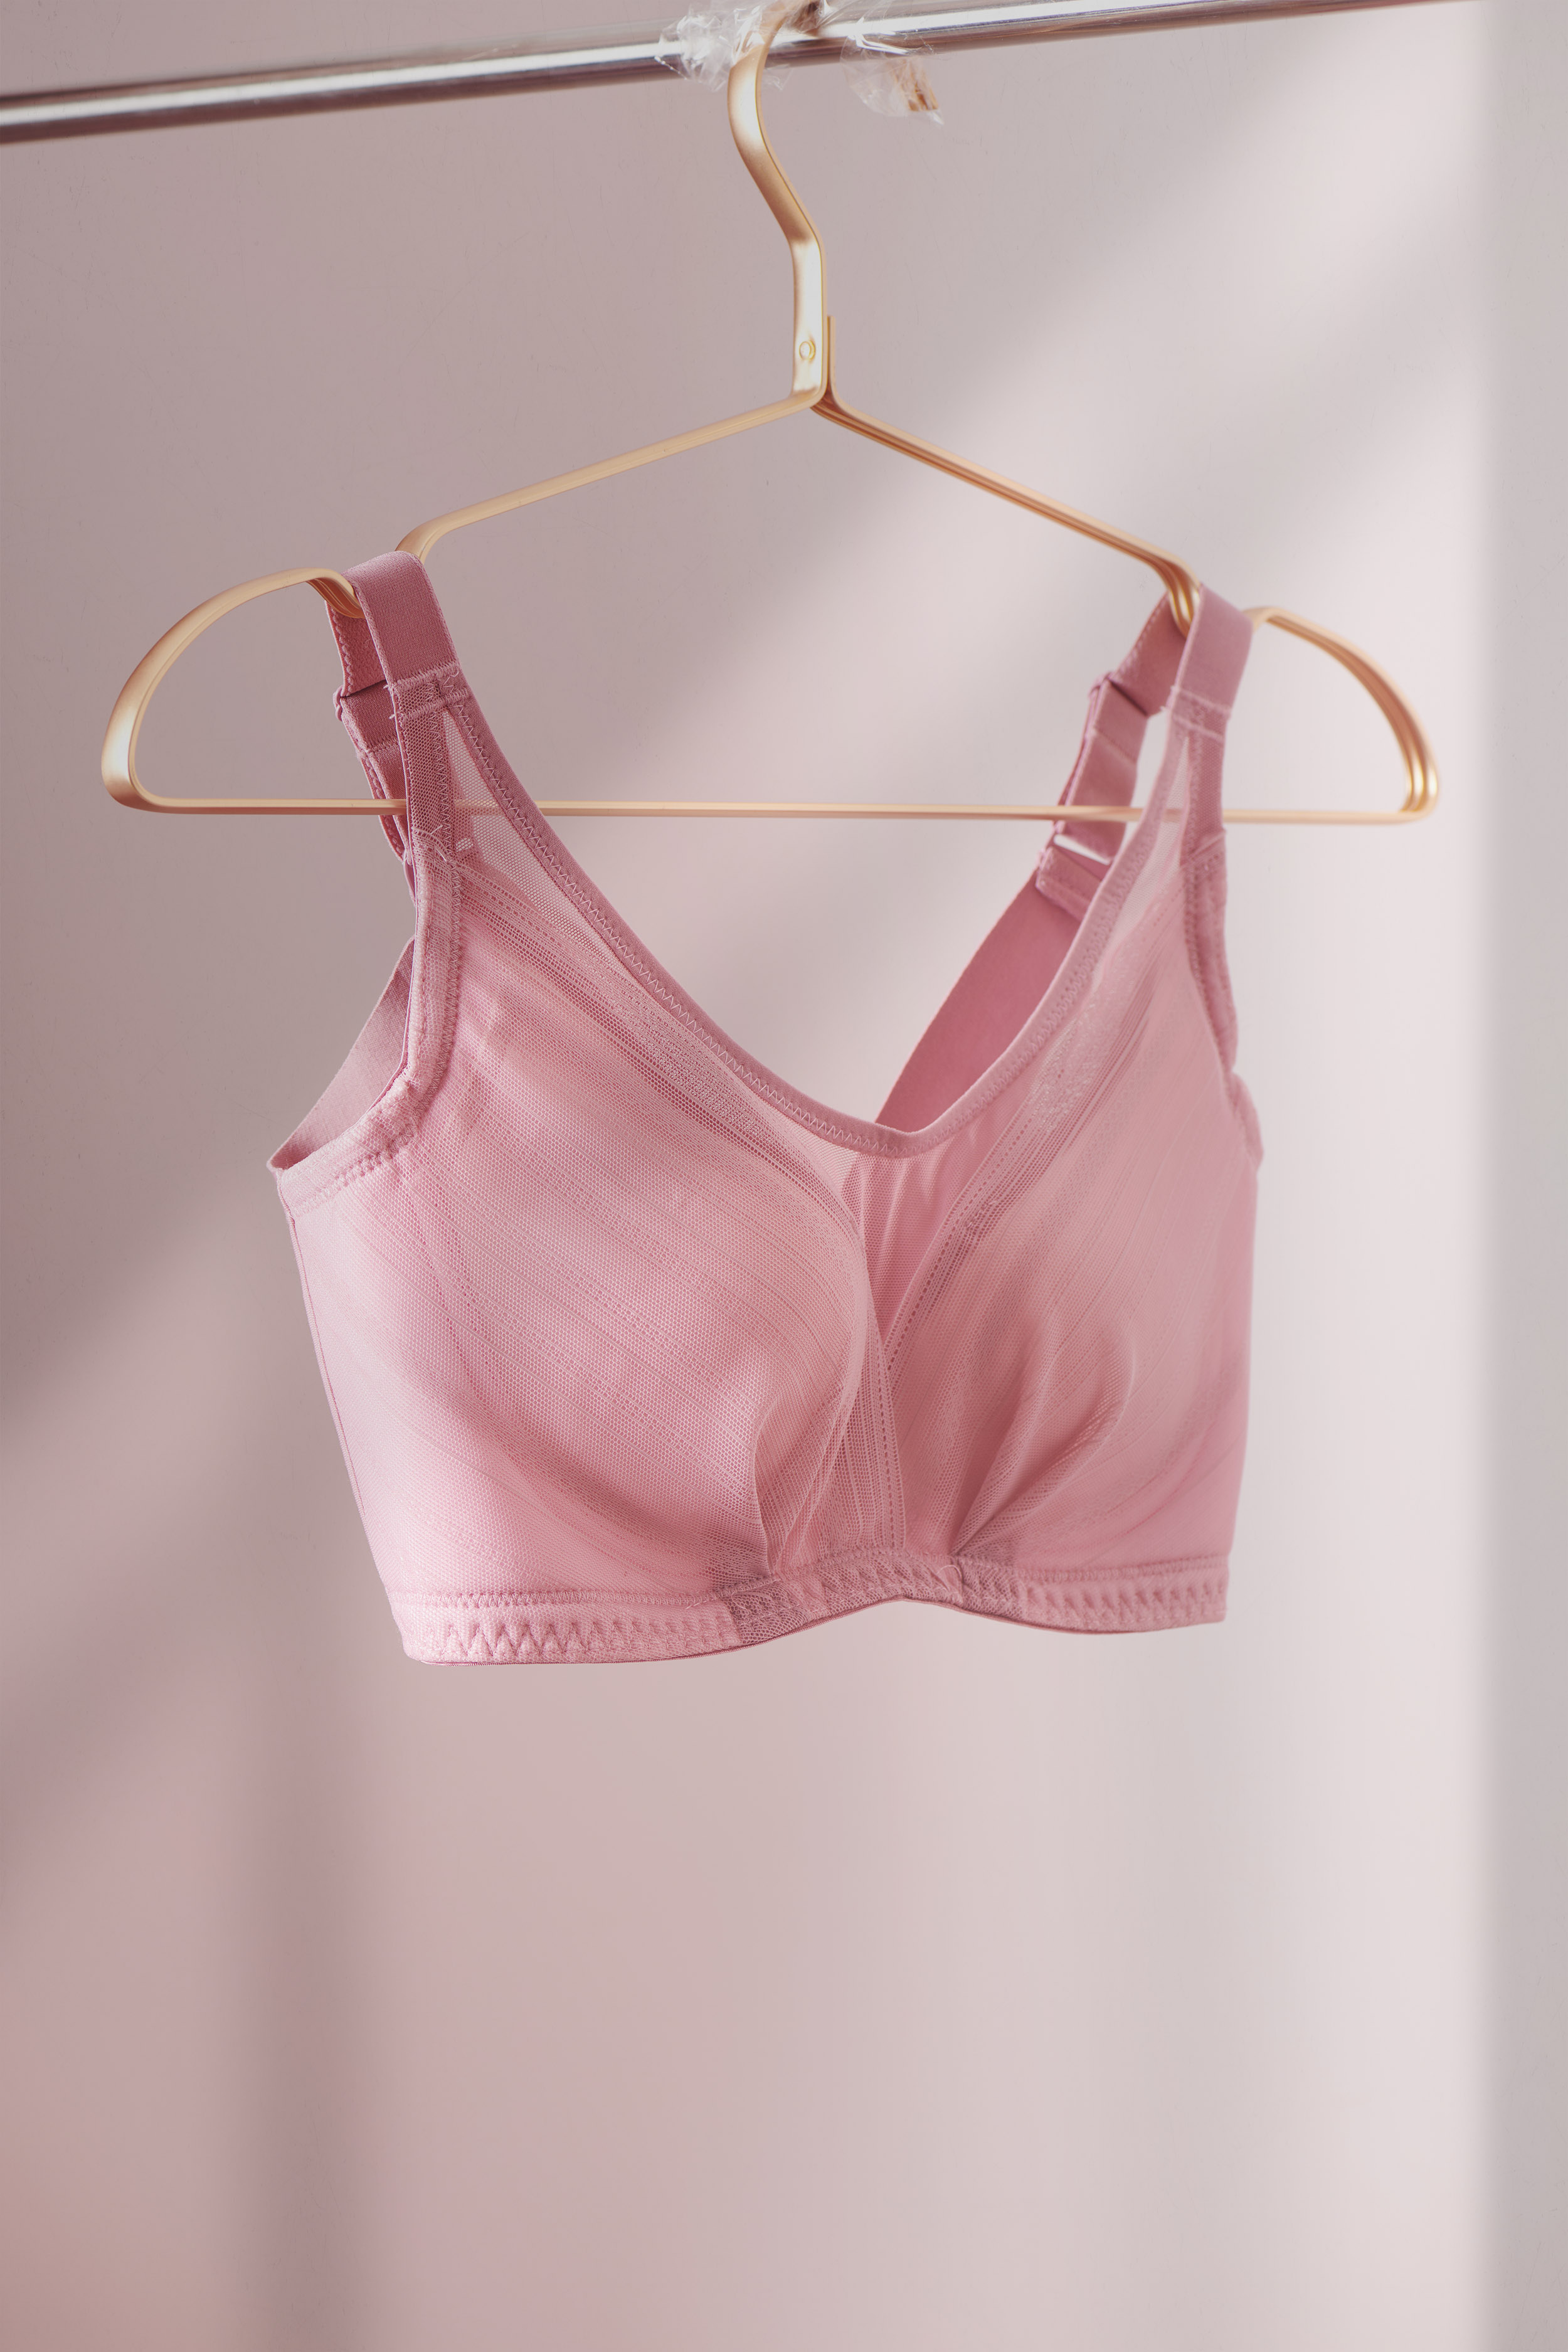 Post-Surgical Reconstruction Bra